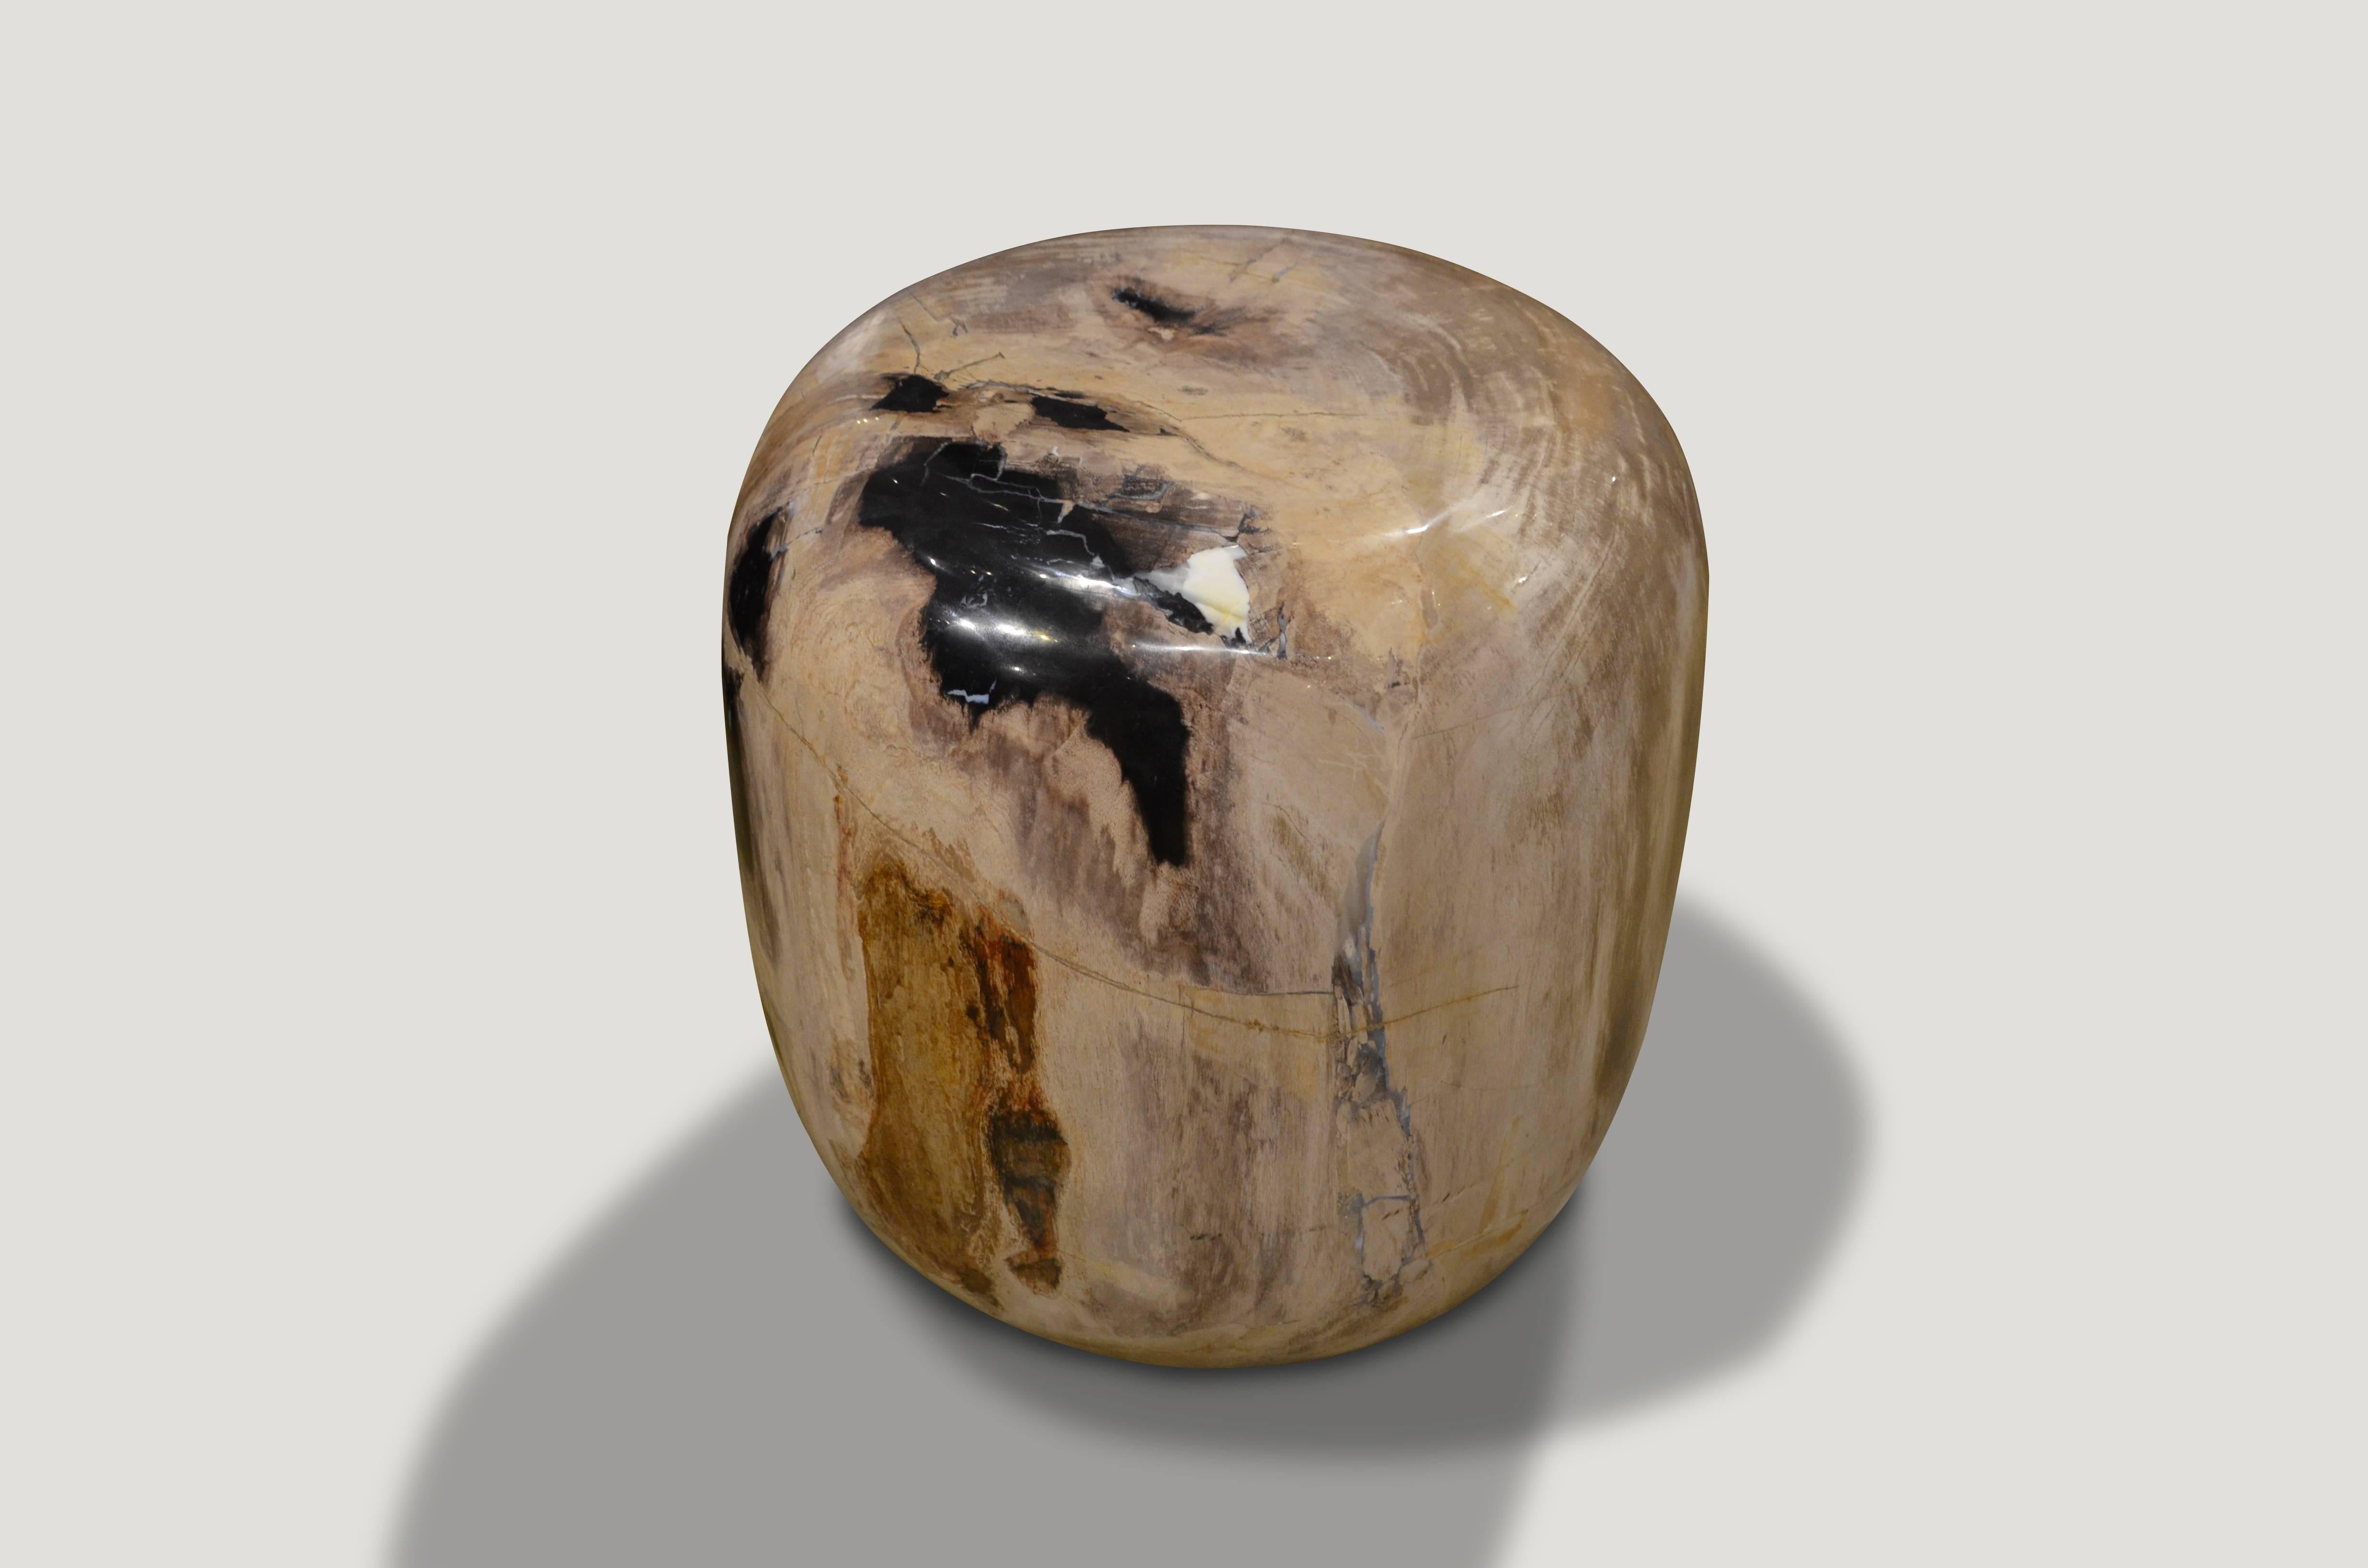 Super smooth petrified wood drum shape side table, in stunning natural beige and black tones.

We source the highest quality petrified wood available. Each piece is hand selected and highly polished with minimal cracks. Petrified wood is extremely